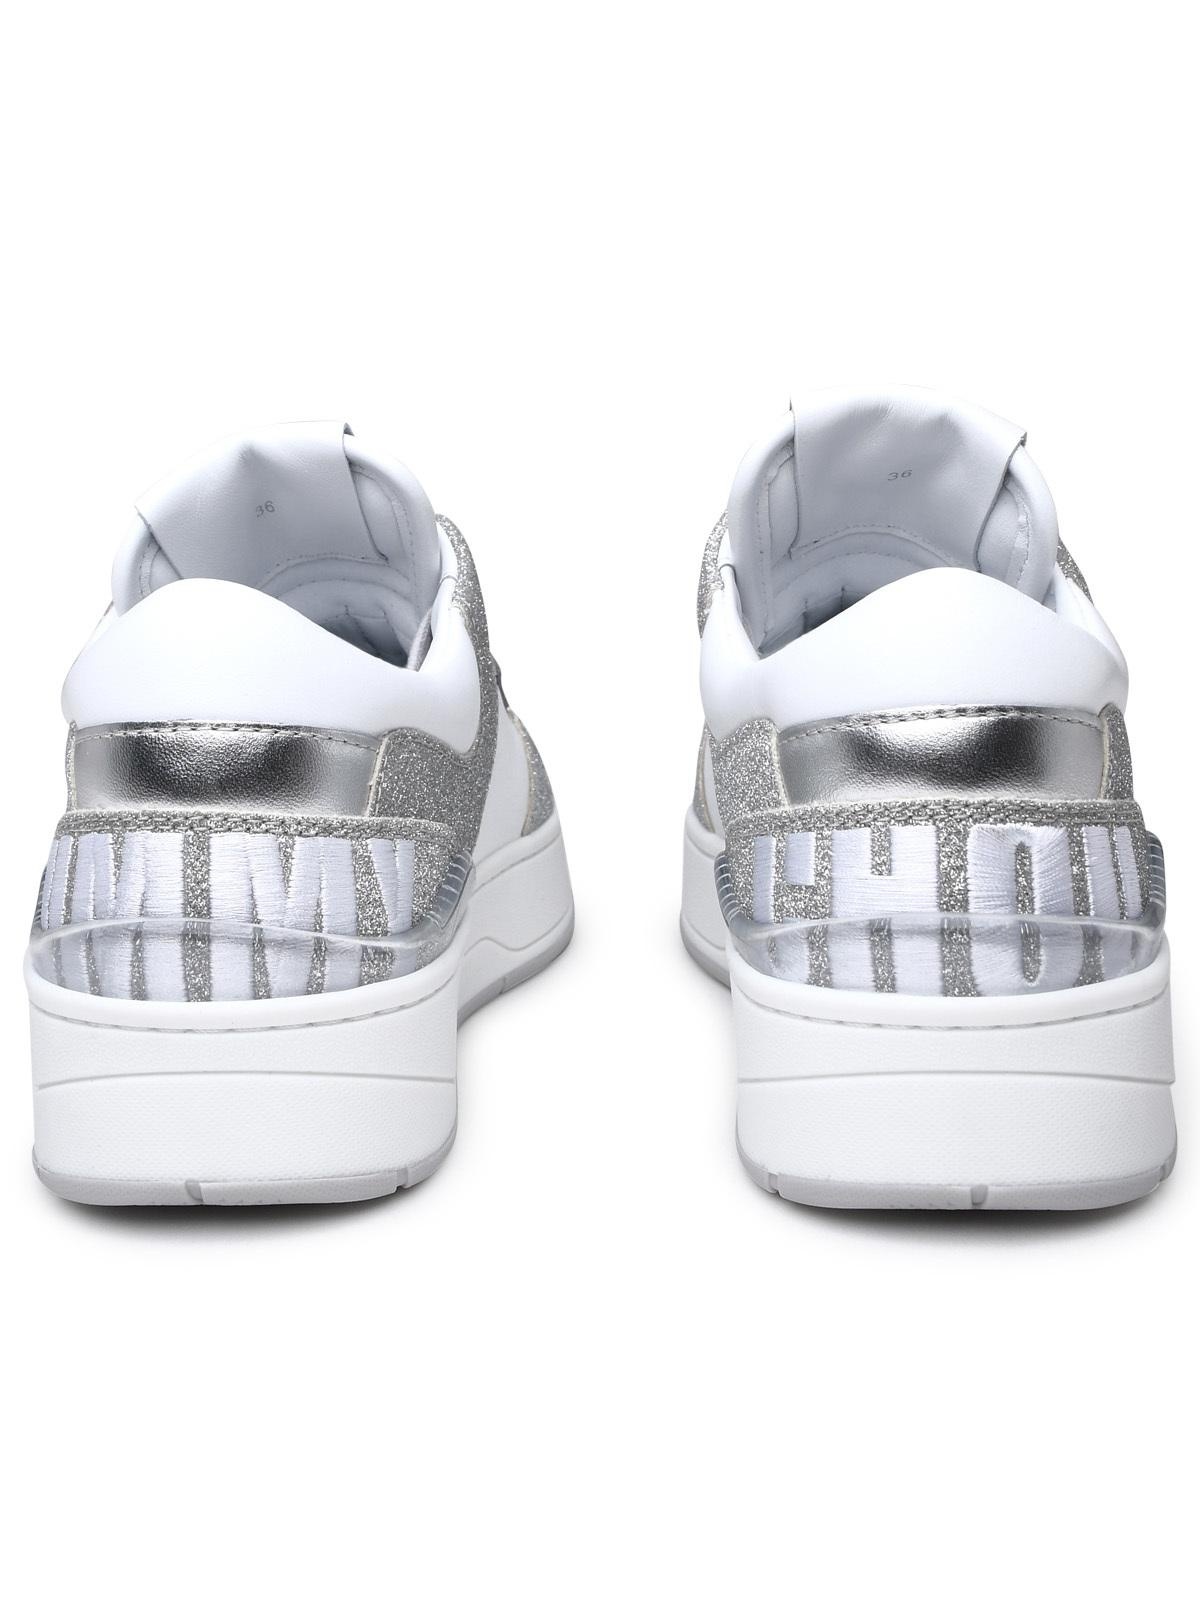 Jimmy Choo Cashmere White Lear Sneakers - 4